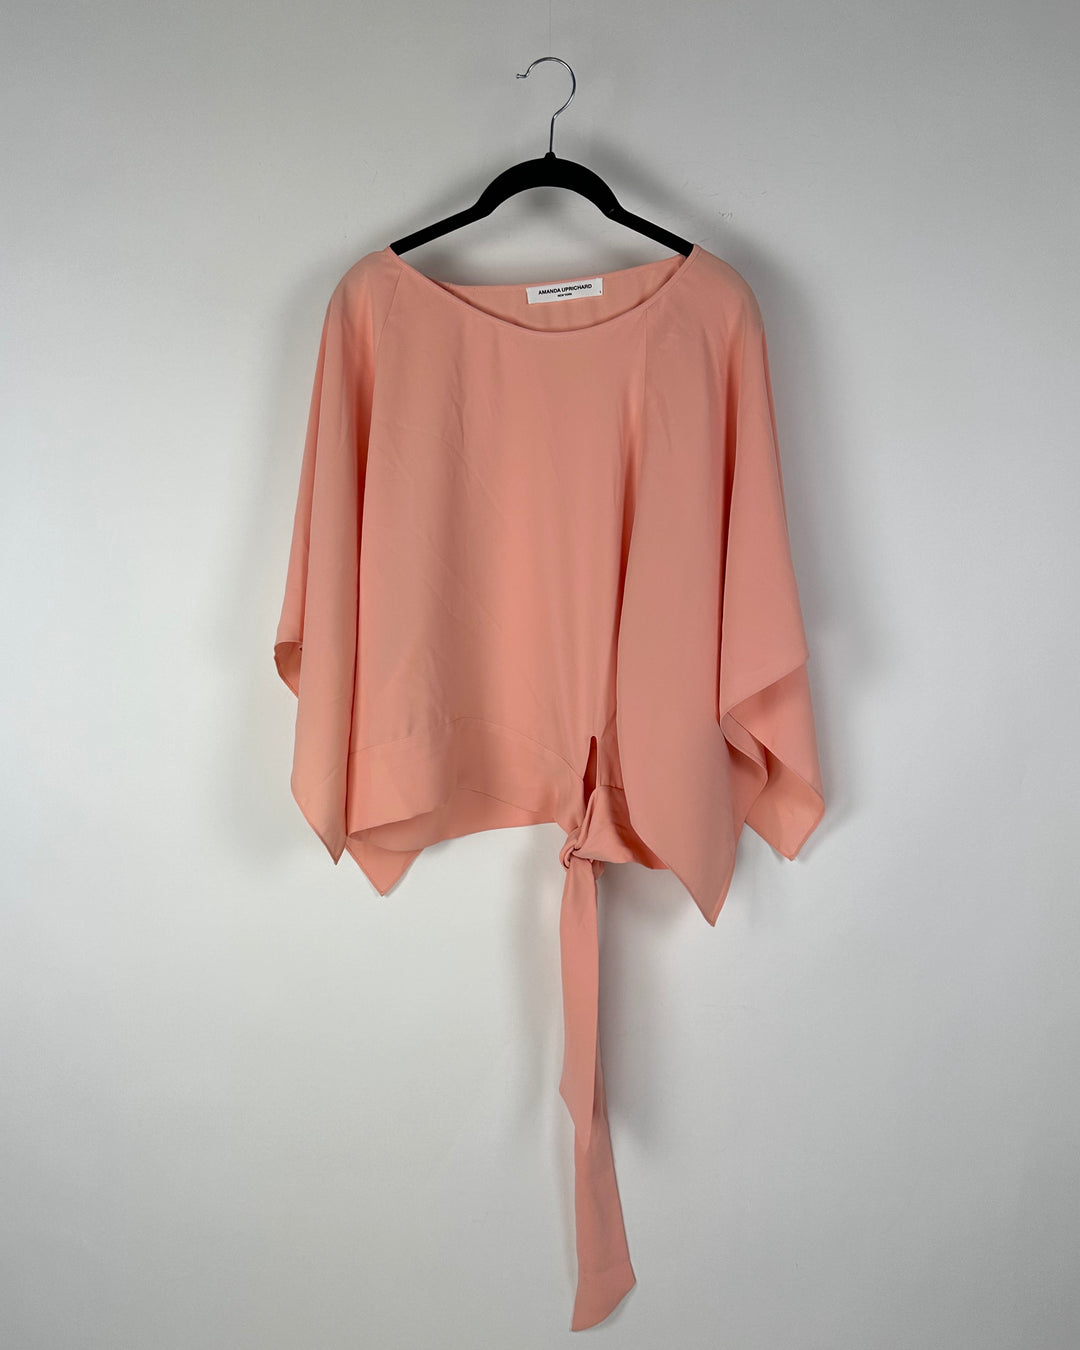 Peach Side Tie Top - Small